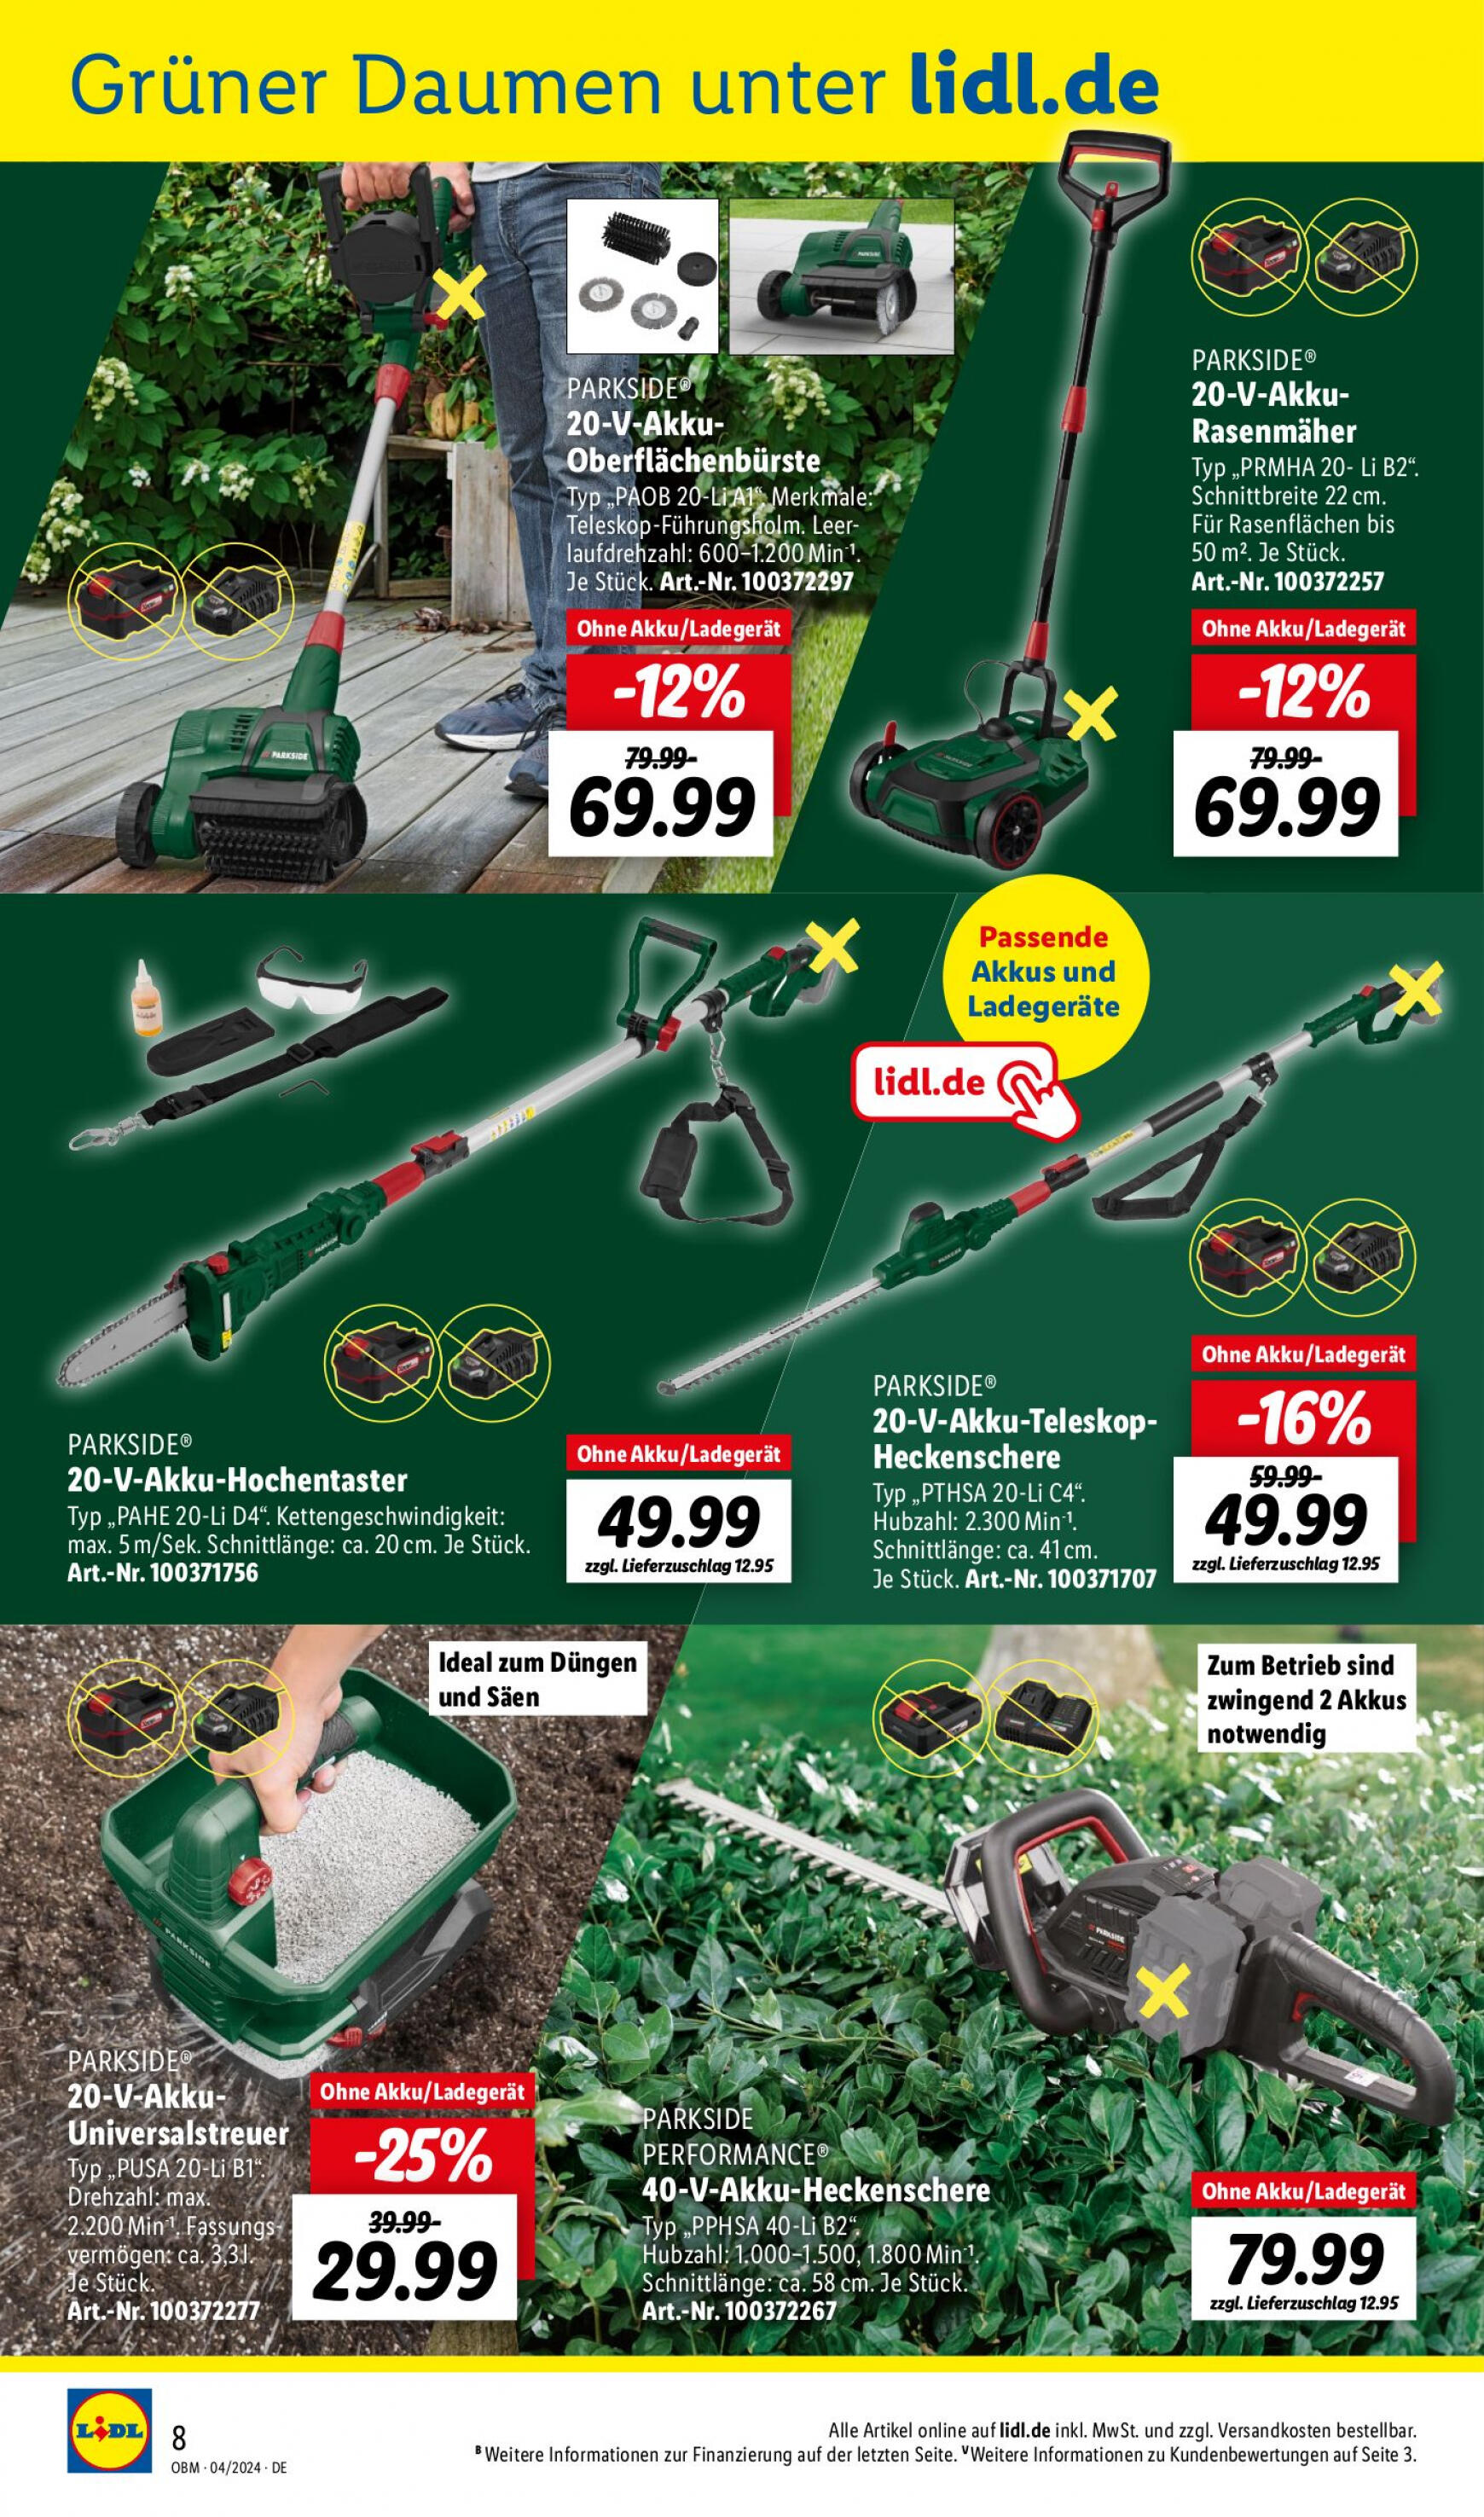 lidl - Flyer Lidl - Aktuelle Onlineshop-Highlights aktuell 01.04. - 30.04. - page: 8